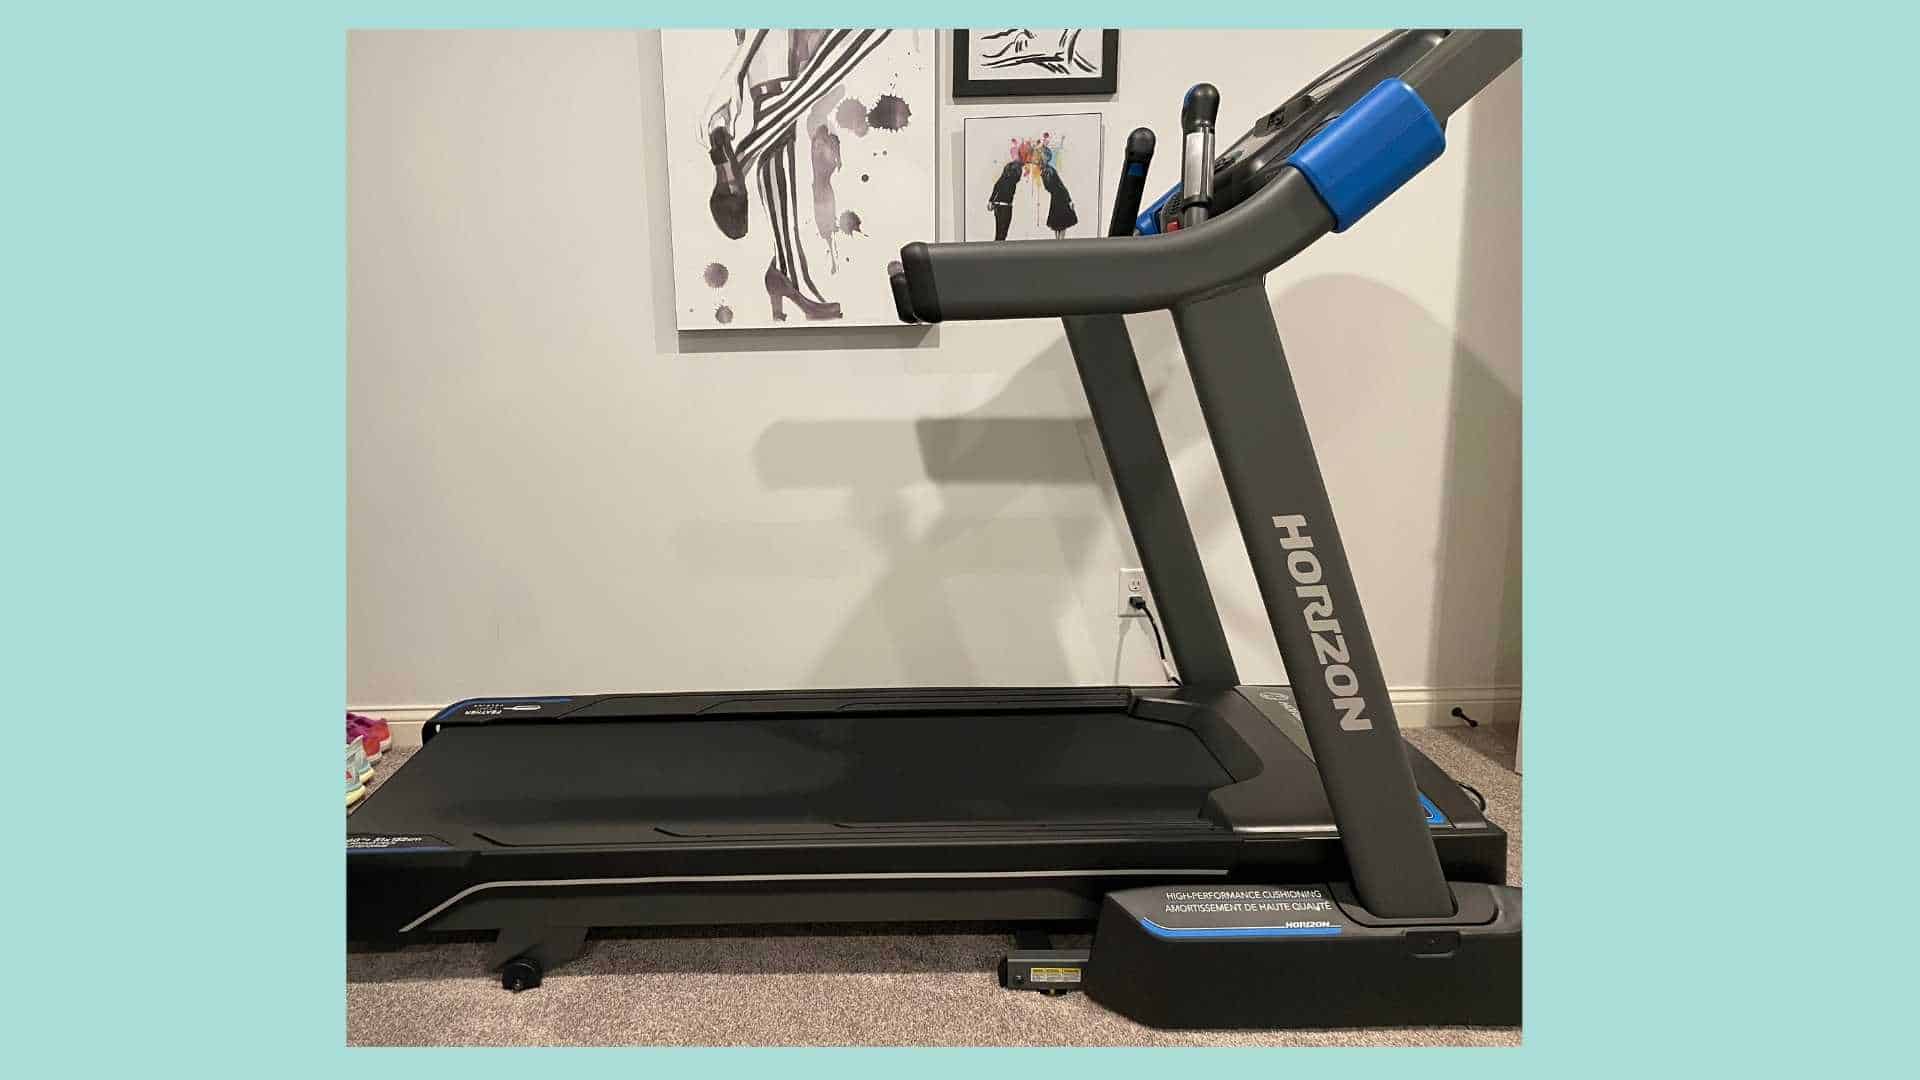 Can You Use The Peloton App With Any Treadmill? Find Out!